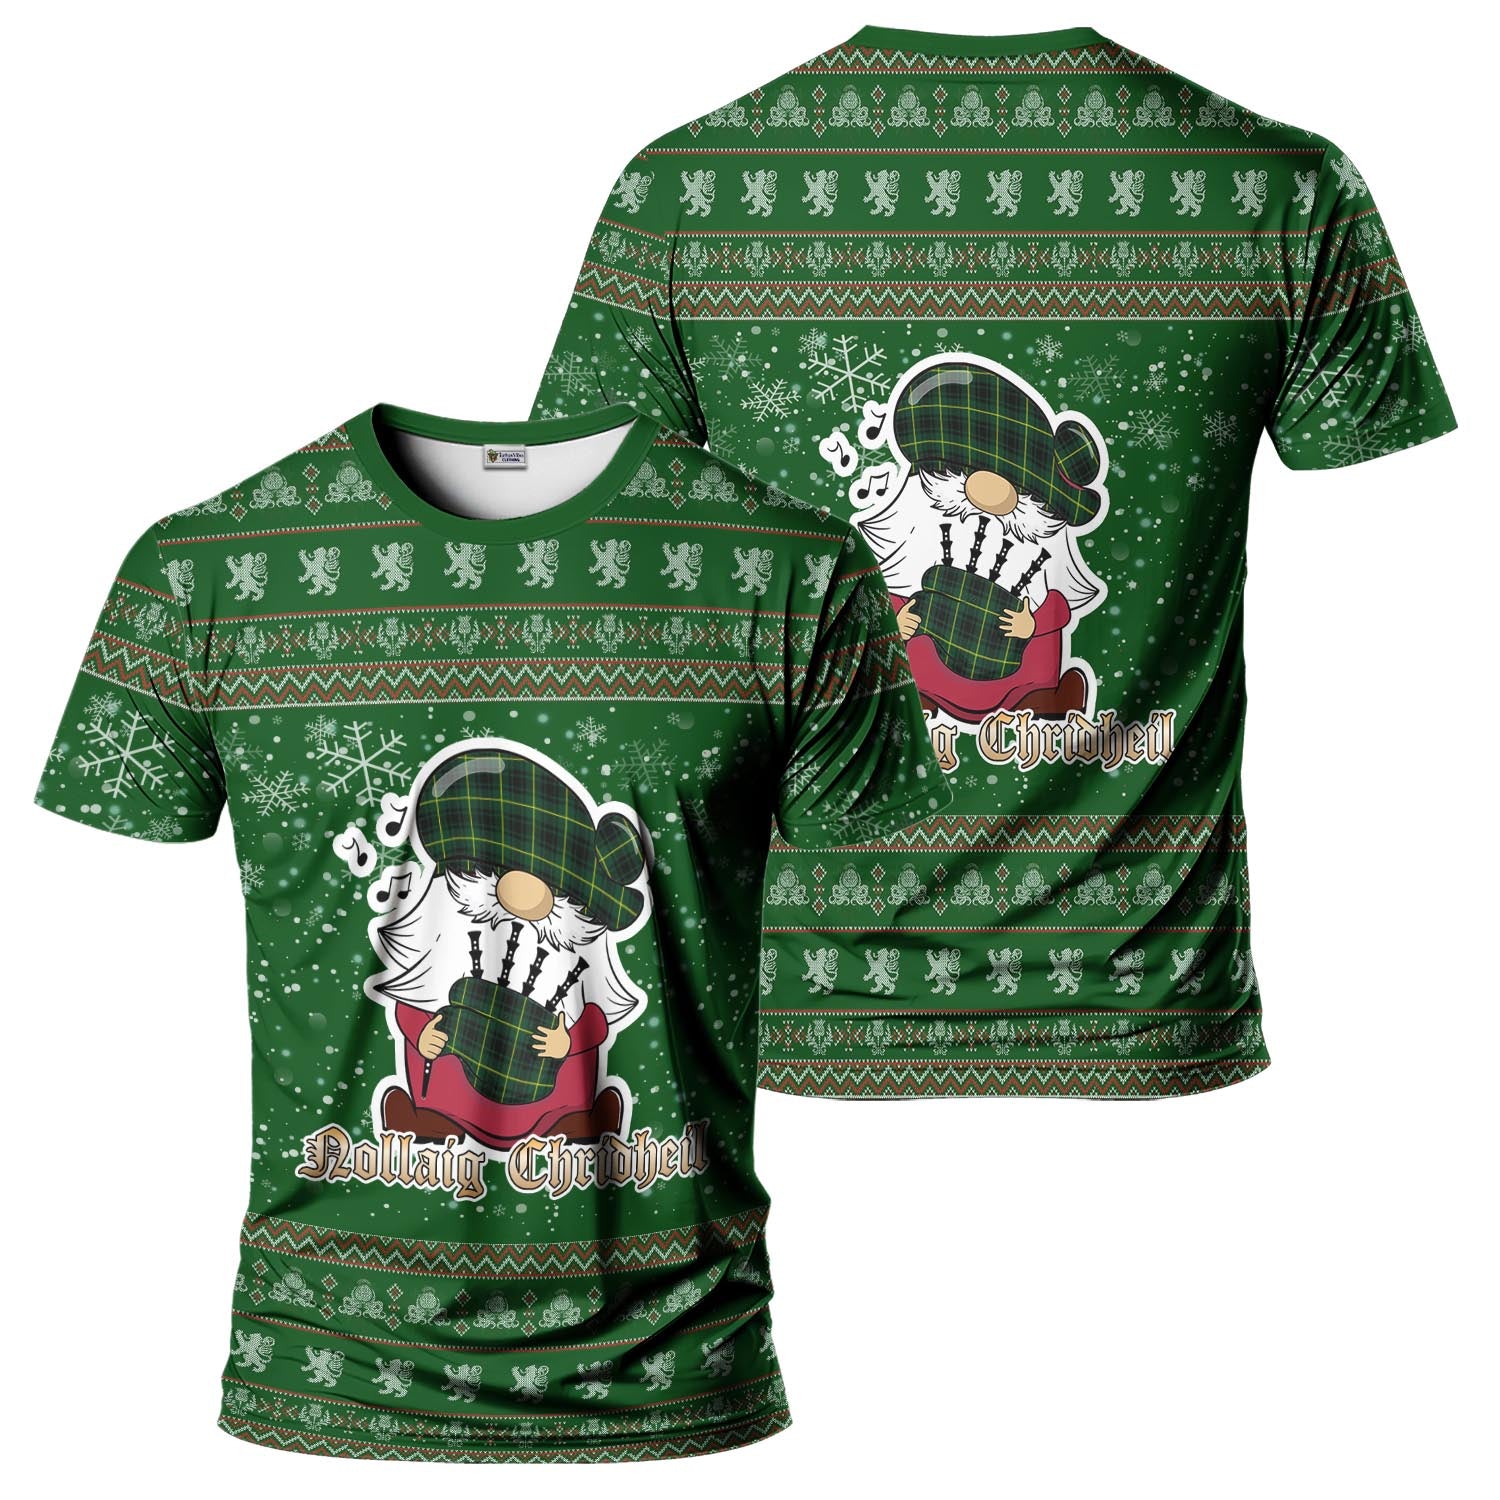 MacArthur Modern Clan Christmas Family T-Shirt with Funny Gnome Playing Bagpipes Men's Shirt Green - Tartanvibesclothing